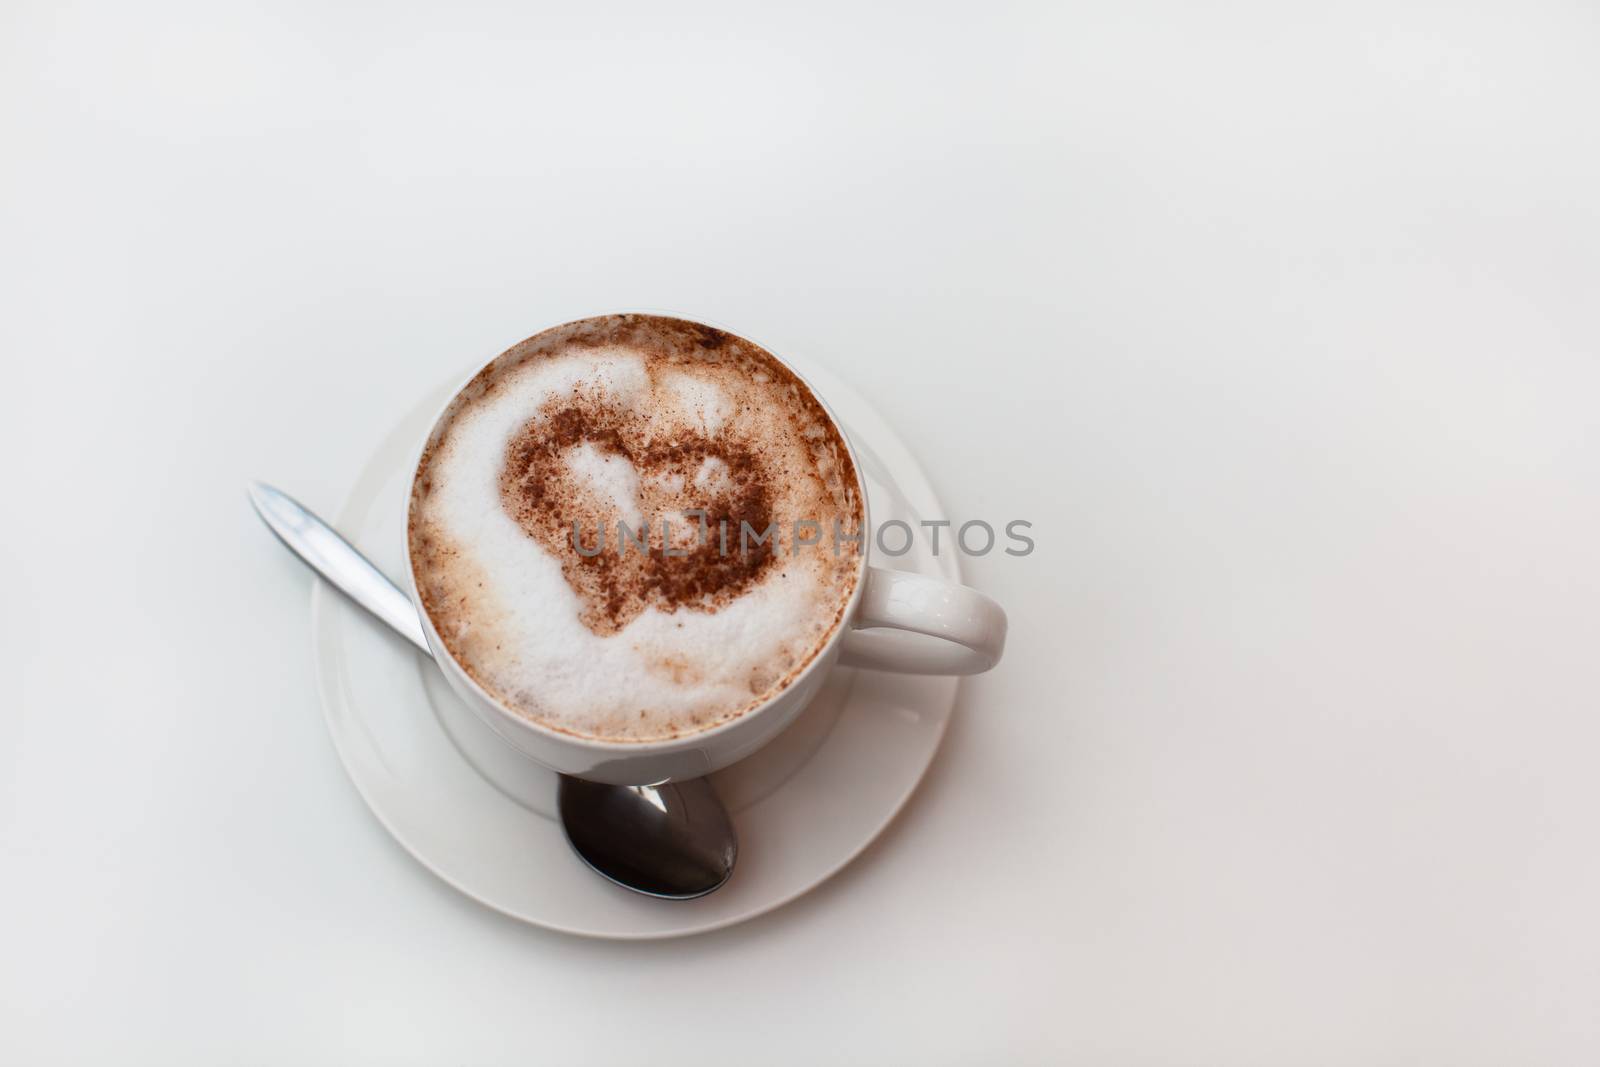 Cappuccino cup on white table background. Foam is decorated with cinnamon heart. Copy space. Top view, located at side of frame. Horizontal. Lactose free concept. Soft focus